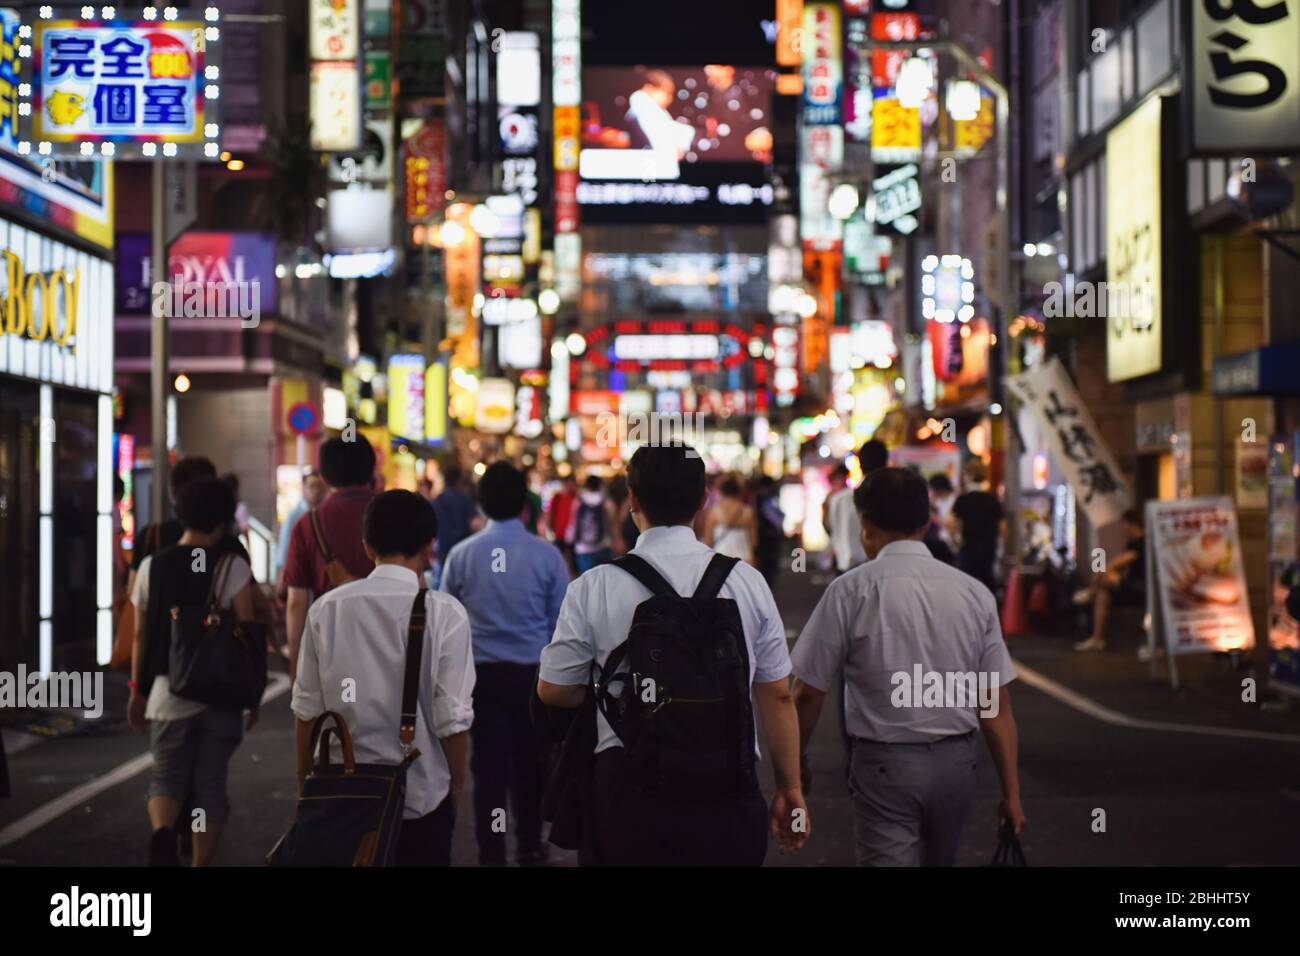 Neon signs line Shinjuku and Shibuya district. The area is a nightlife district known as Sleepless city. Stock Photo